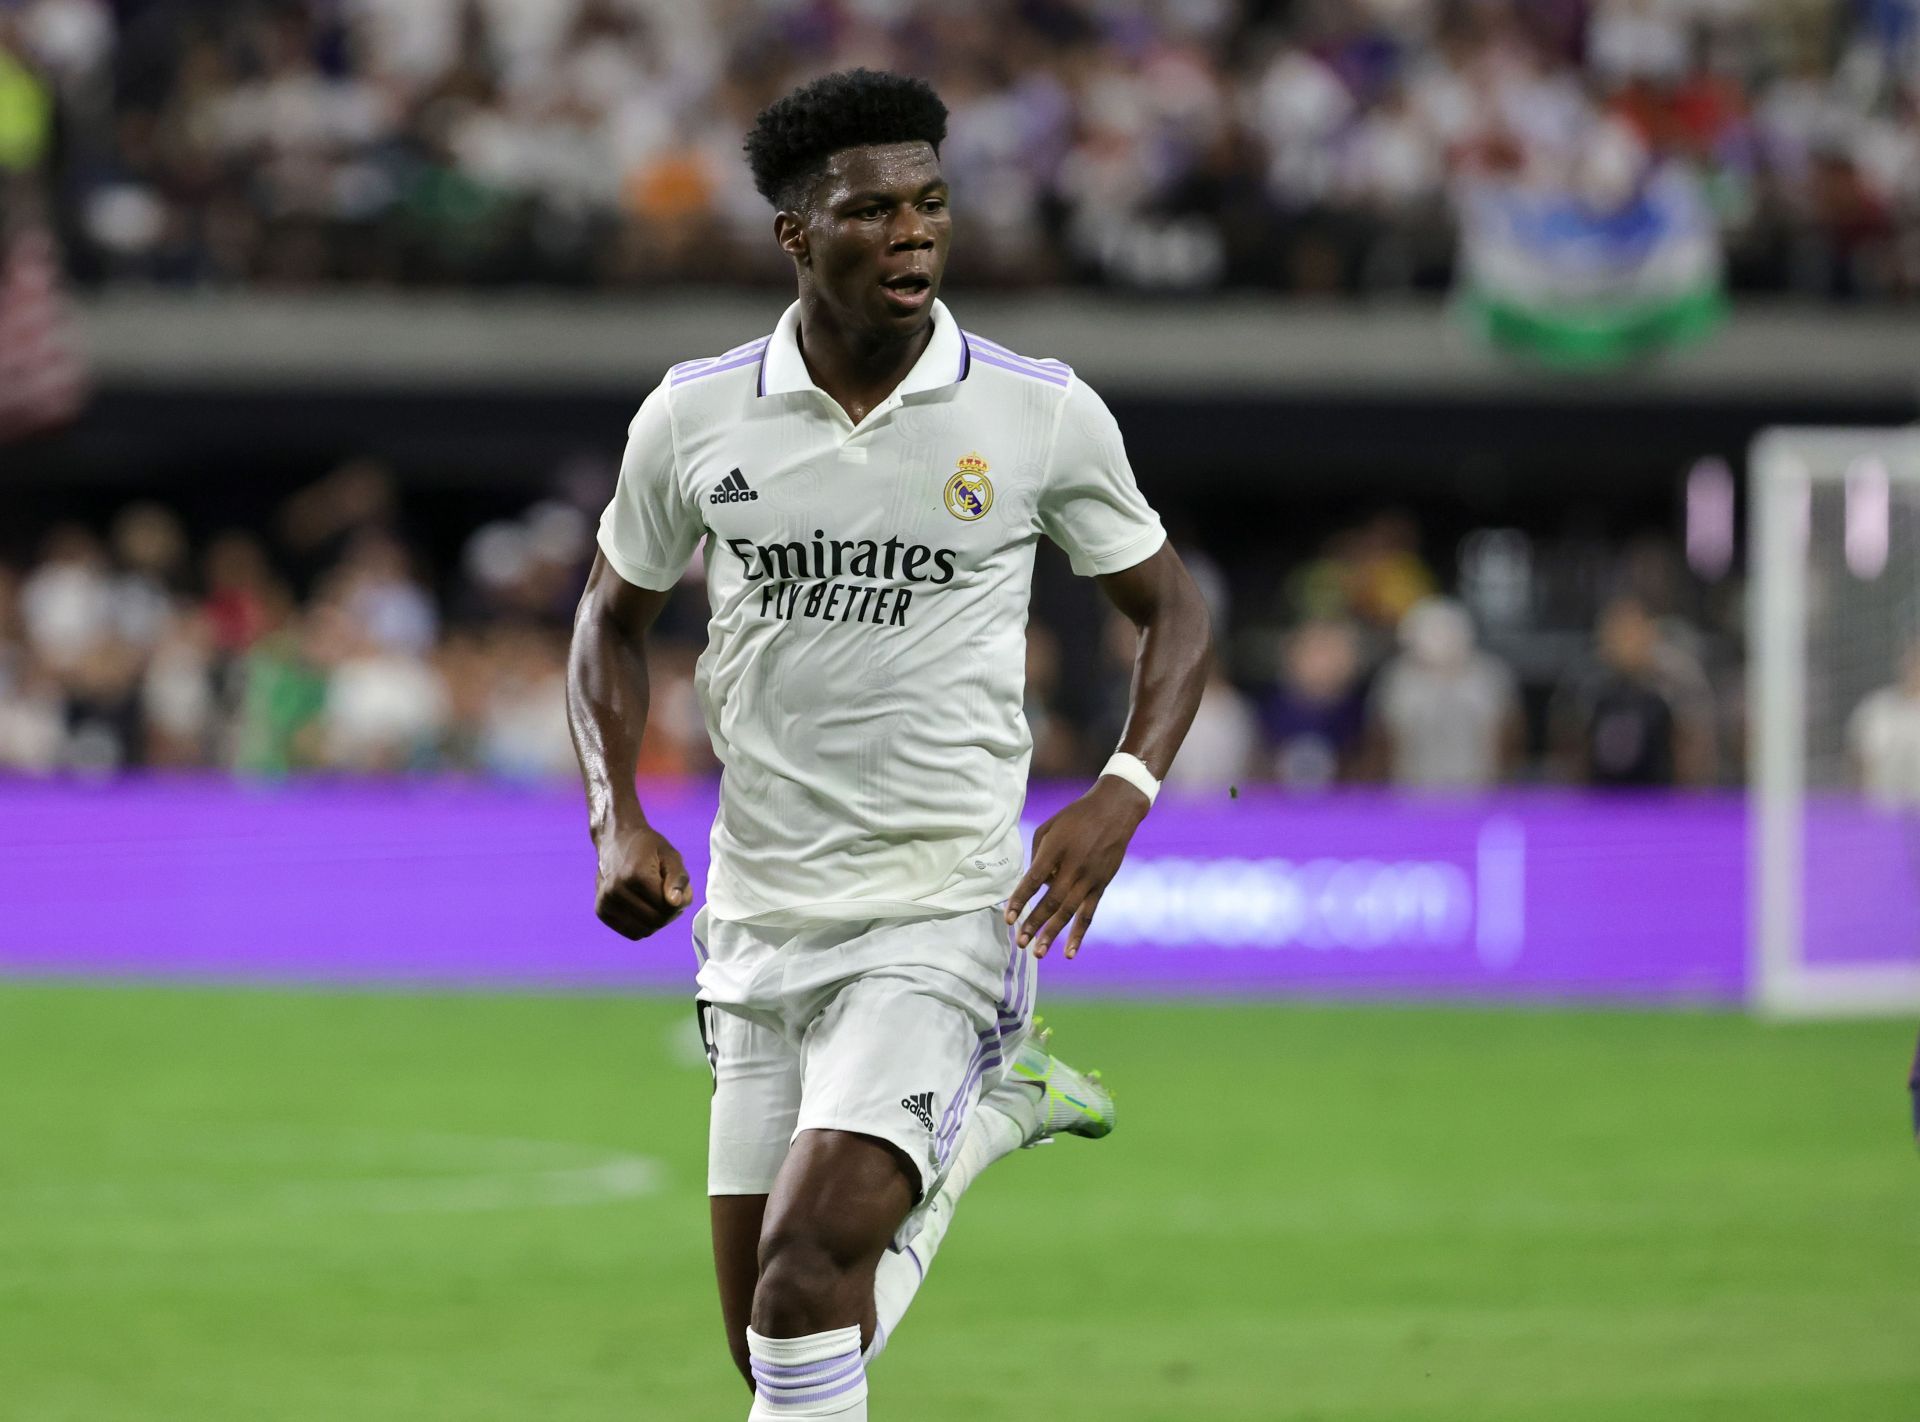 Tchouameni is an important player for Real Madrid